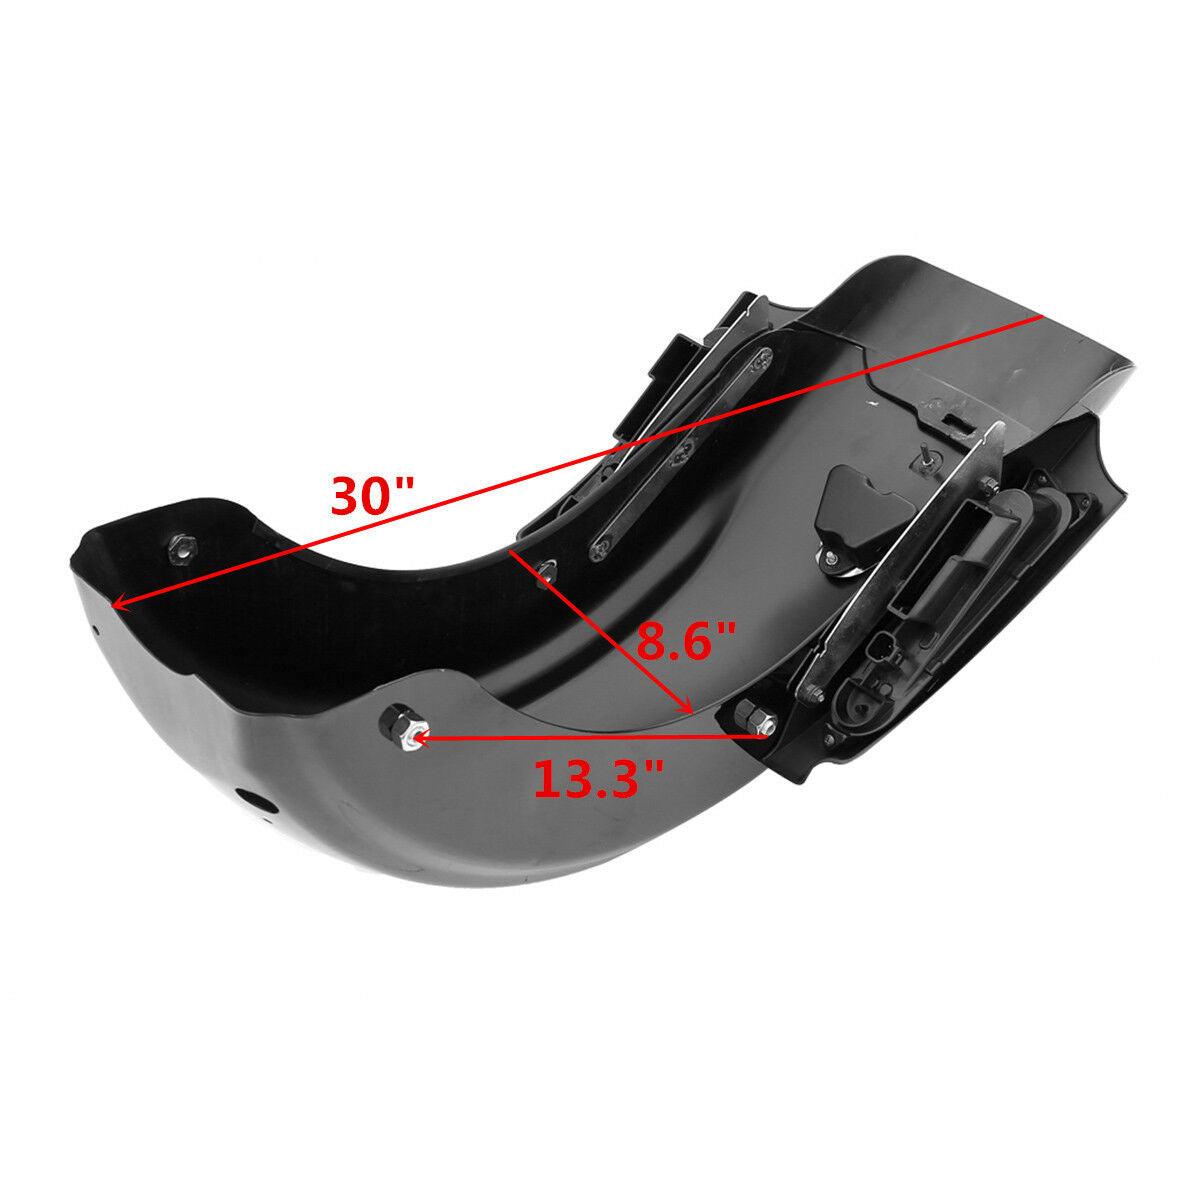 5" Extended Saddlebags Rear Fender Fit For Harley CVO Touring Street Glide 09-13 - Moto Life Products